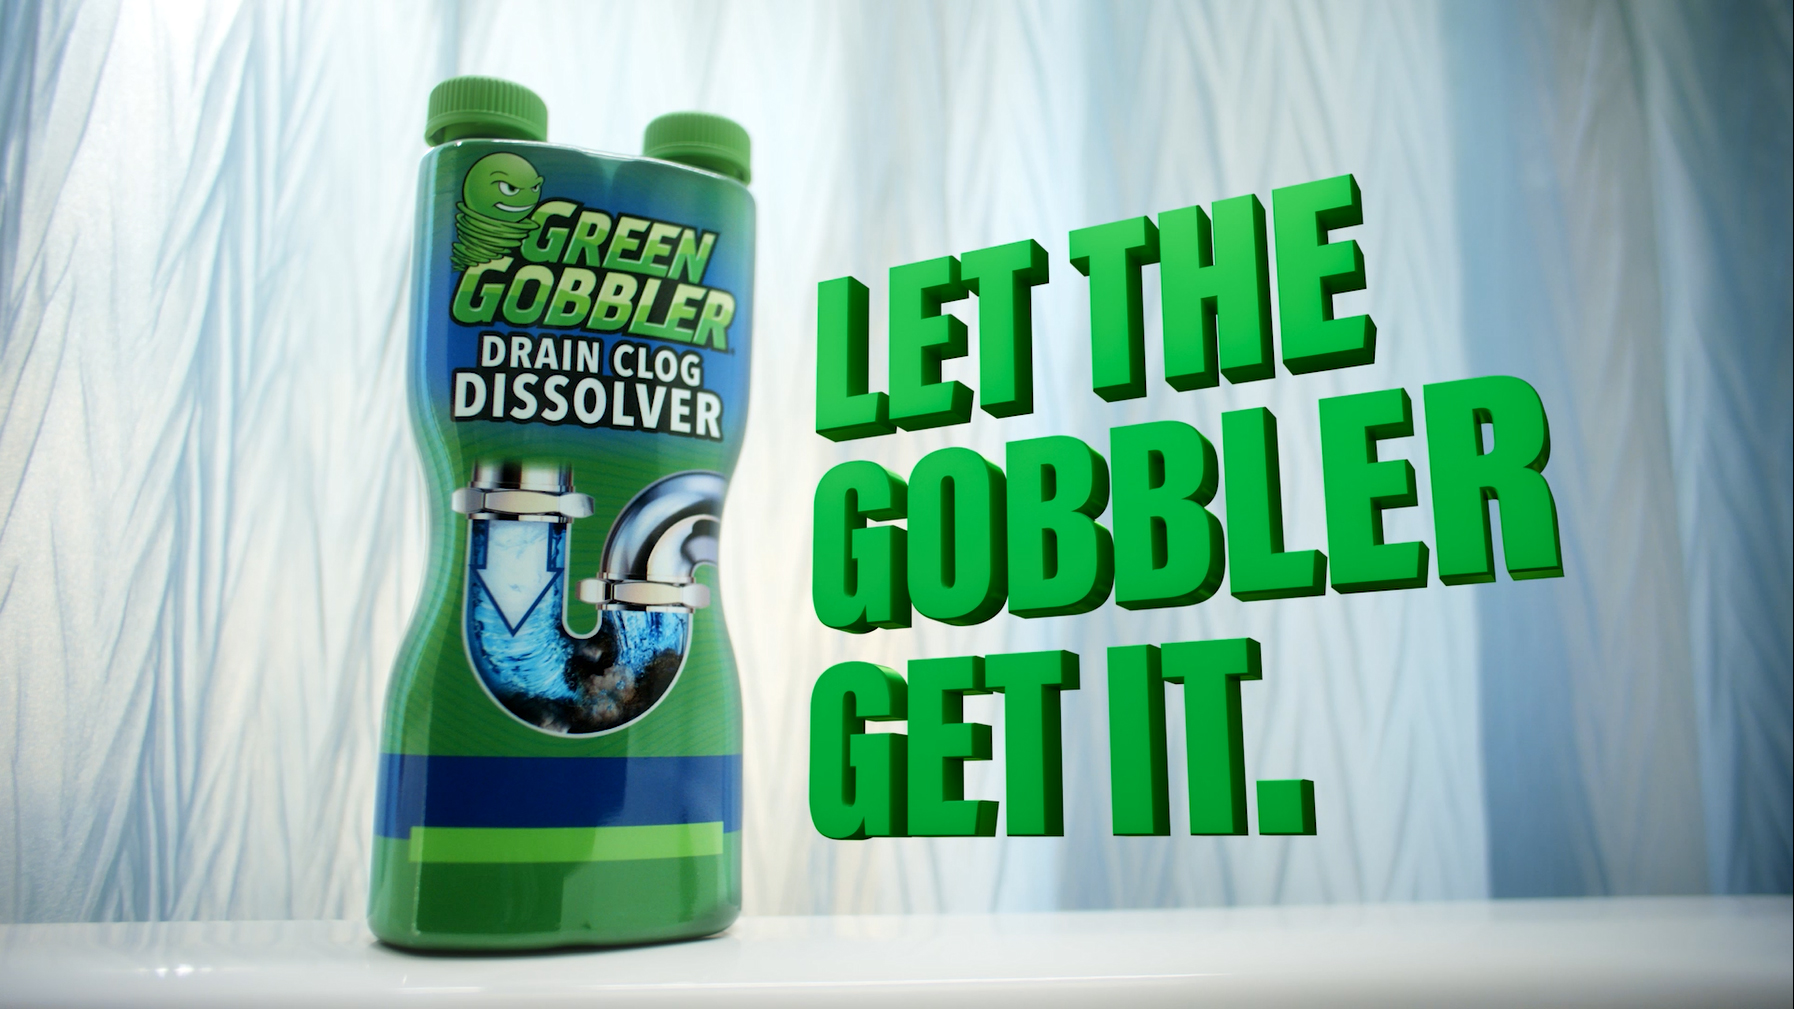 Green Gobbler Liquid Hair Drain Clog Remover & Cleaner, For Toilets, Sinks,  Tubs - Septic Safe, 2 Pack